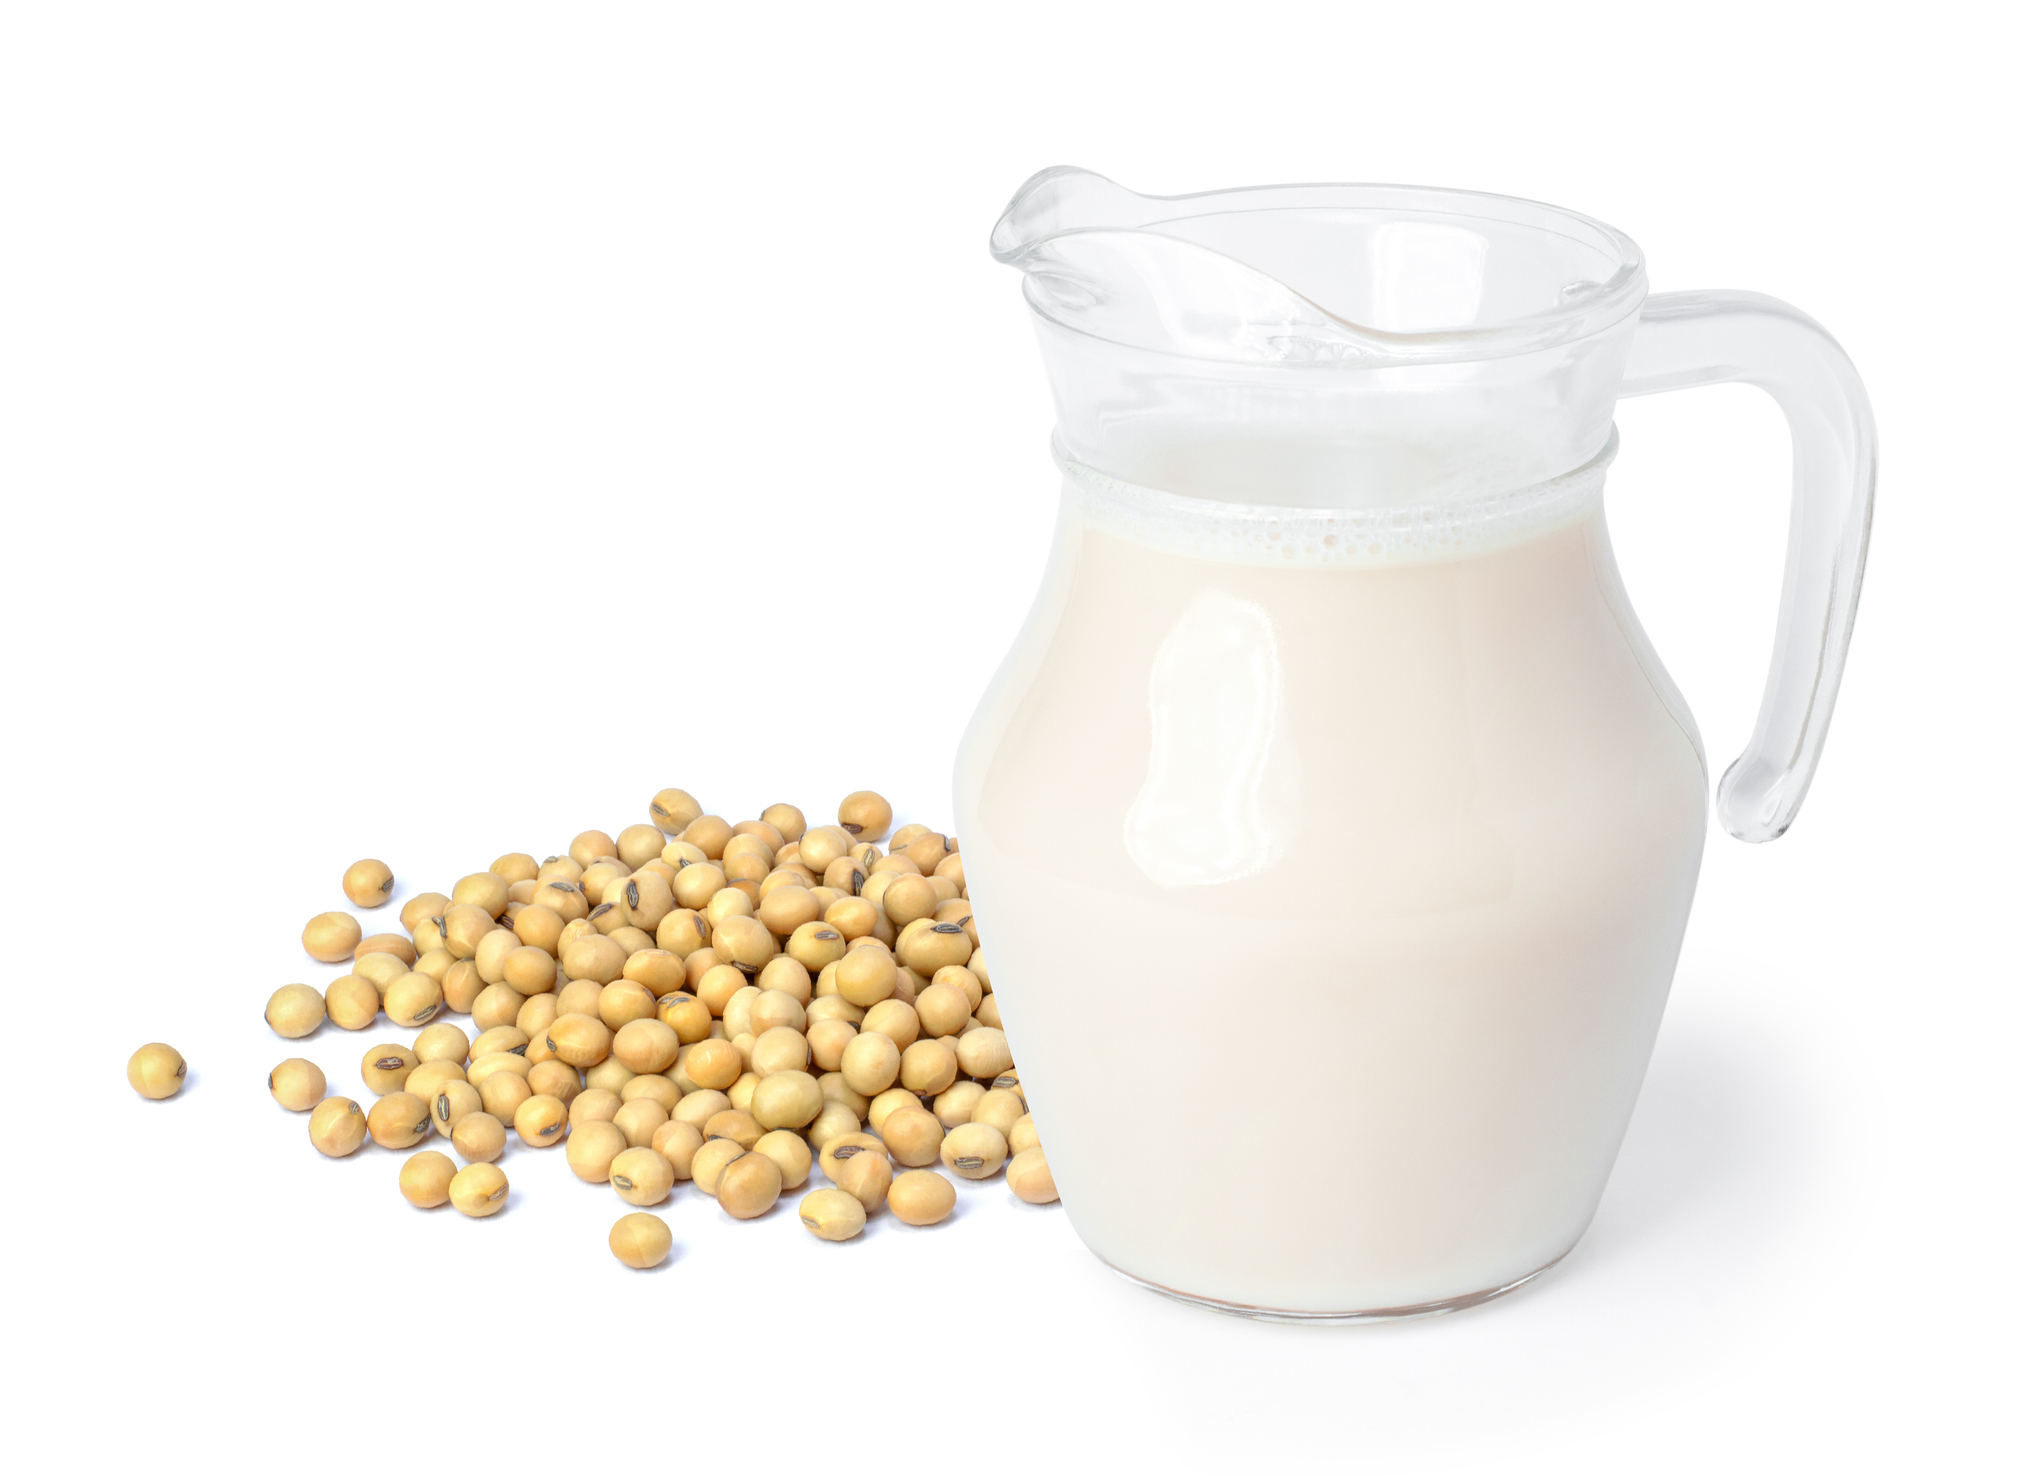 Soymilk in glass jug with soybeans isolated on white background.